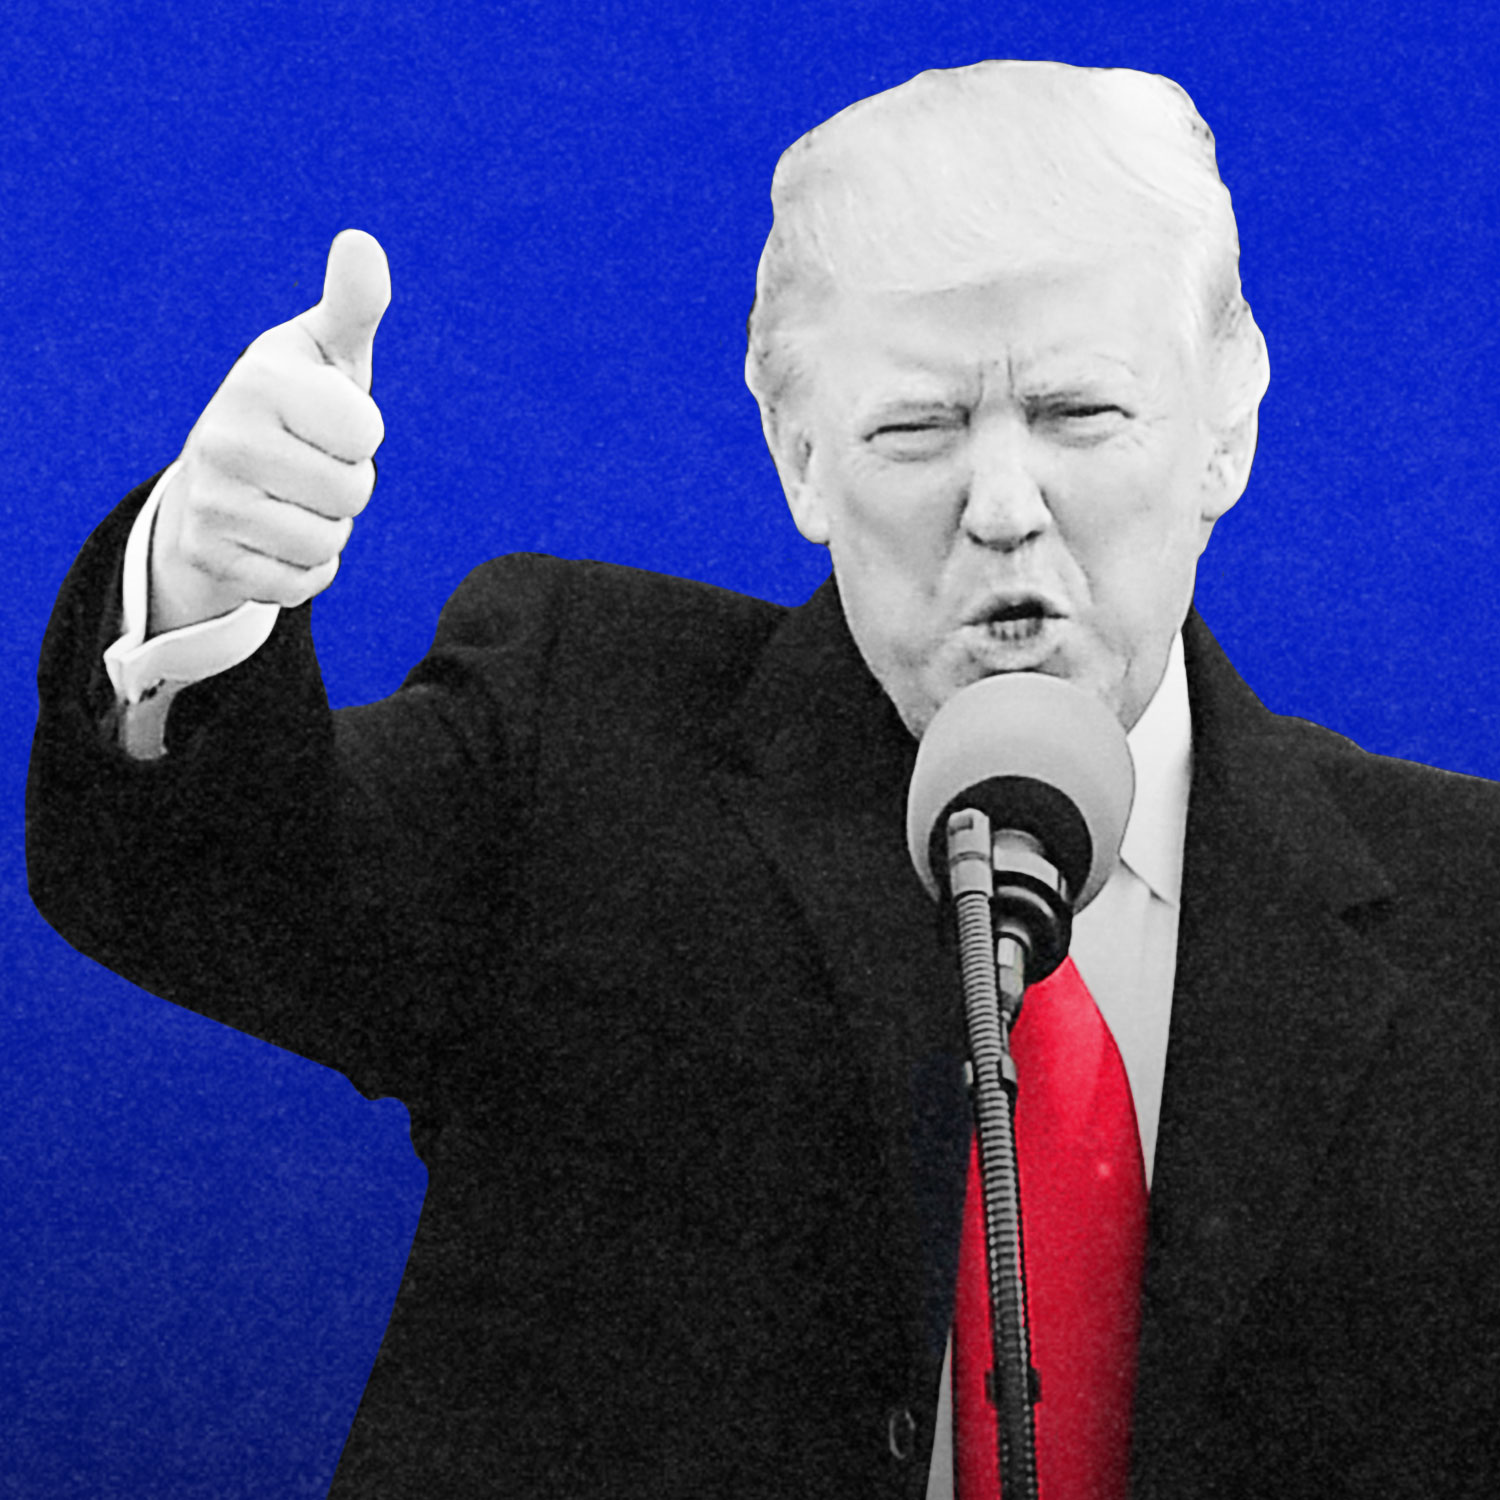 Special episode: One year after Trump’s inauguration, we revisit his speech